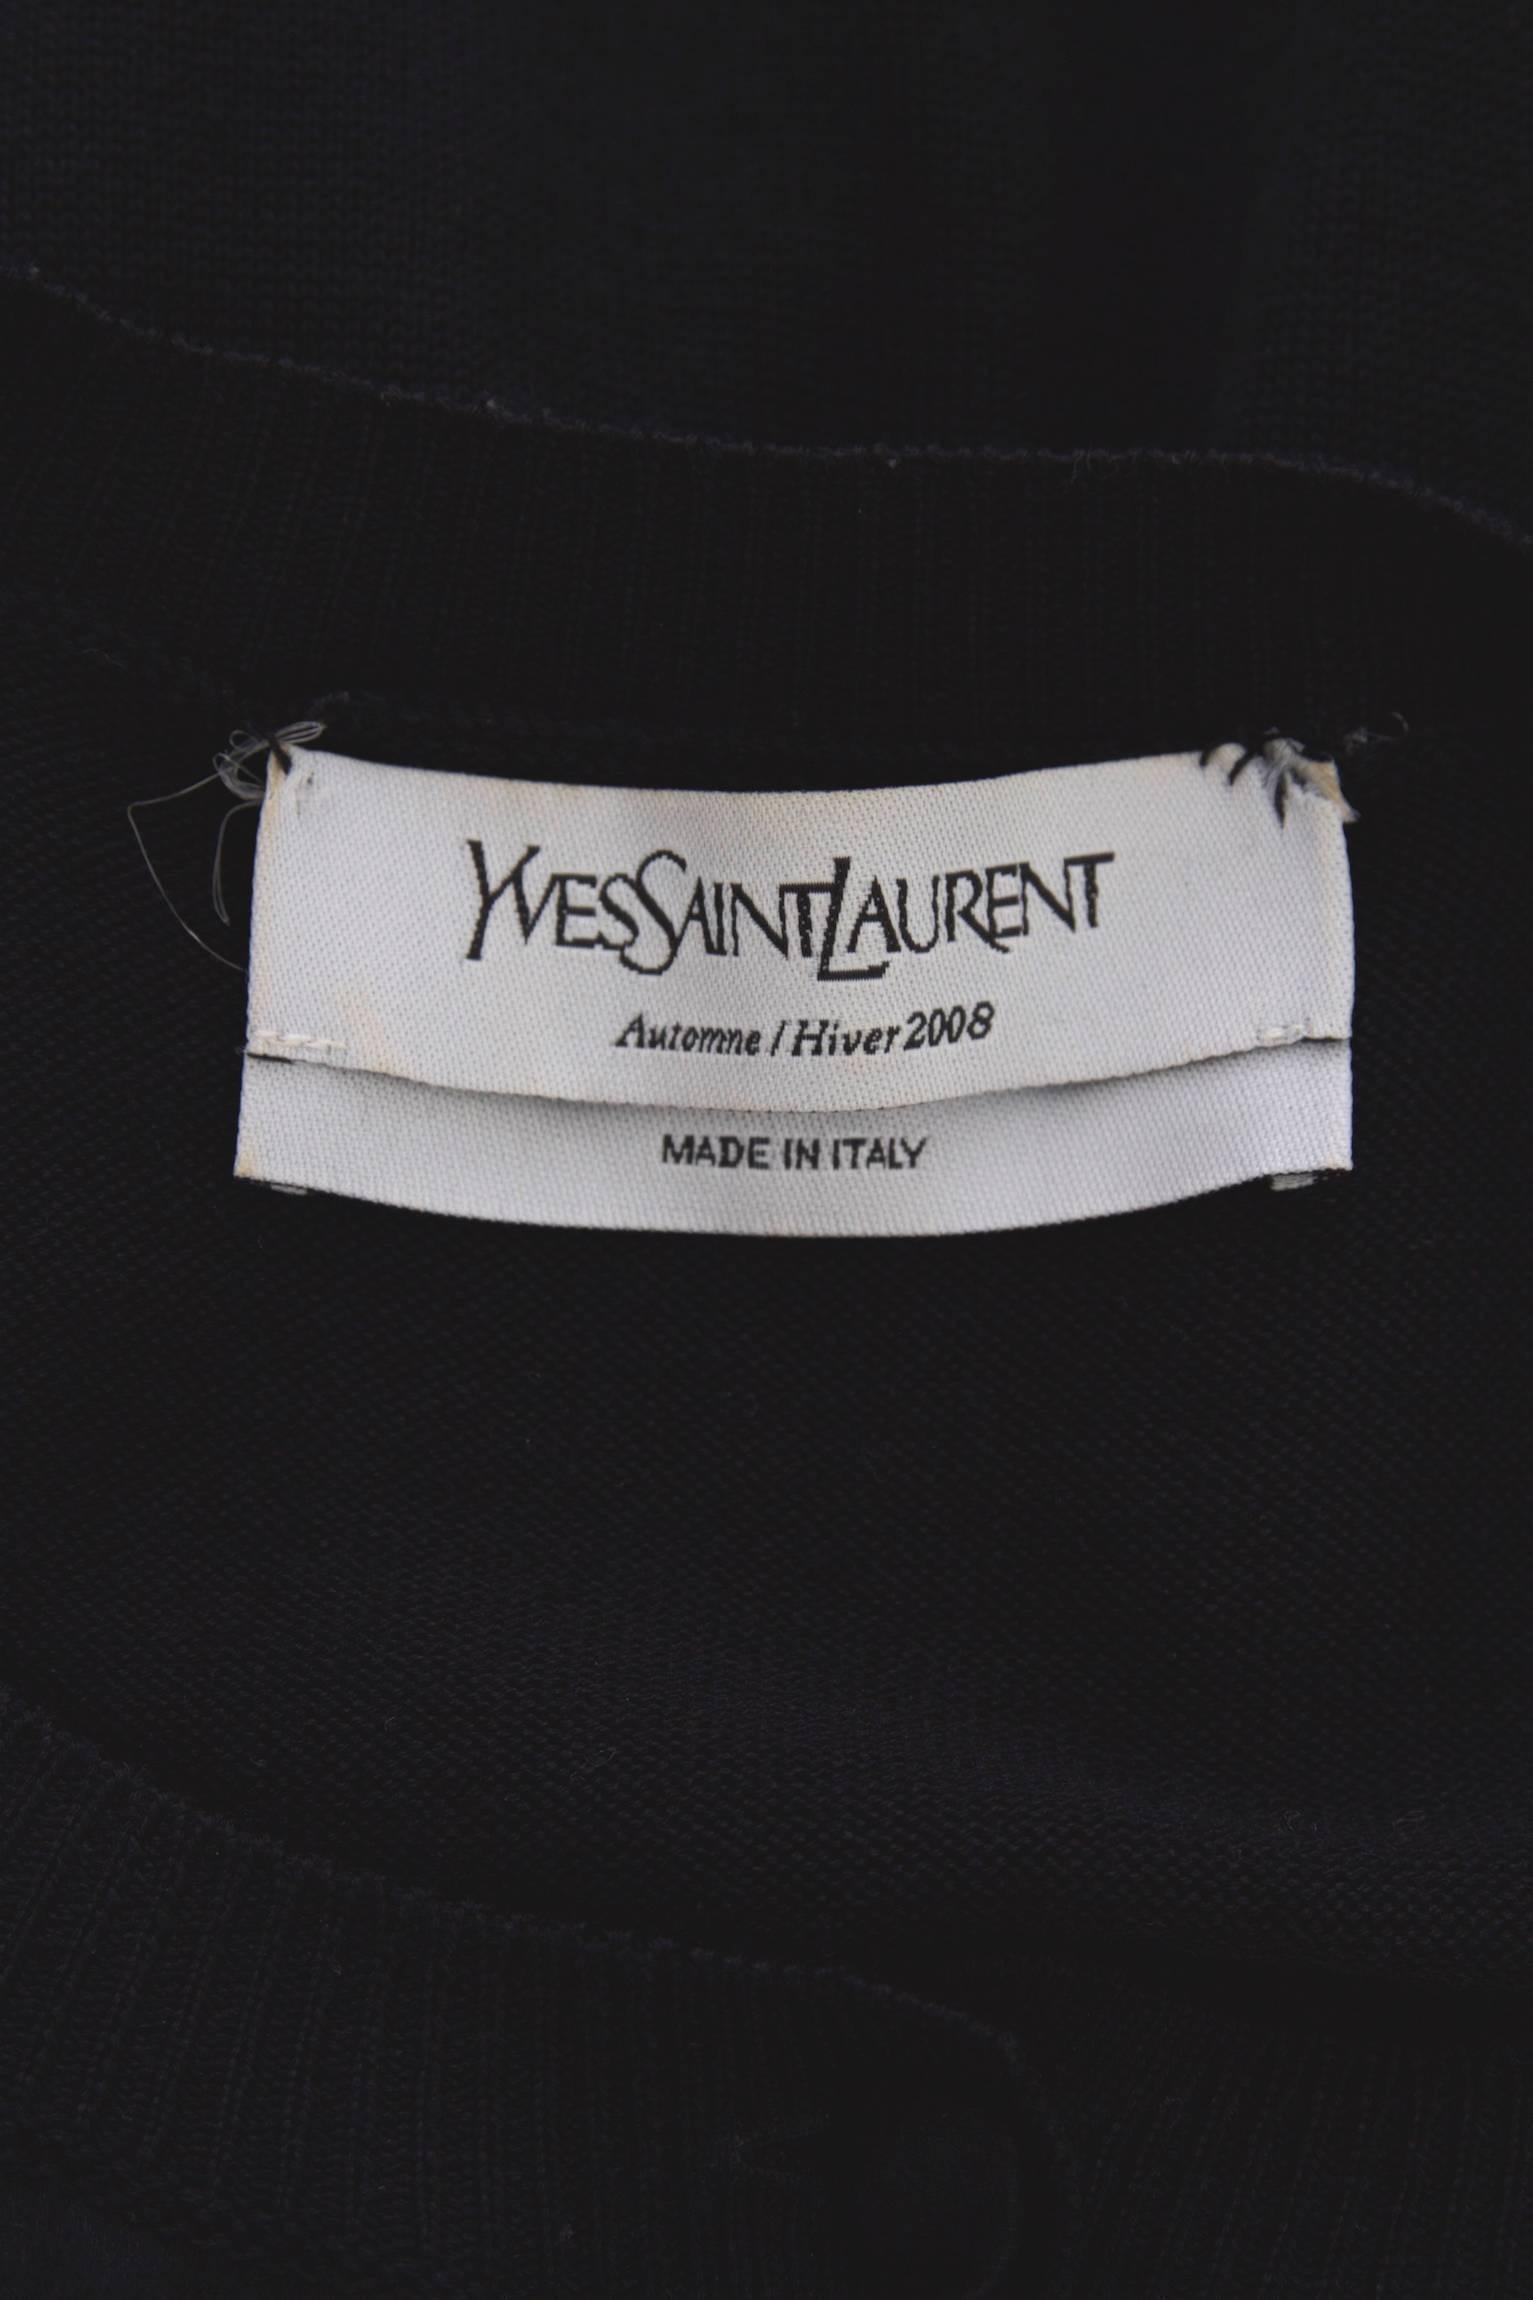 An Yves Saint Laurent black wool and silk satin dress from the Automne/Hiver 2008 collection. The dress consists of a knitted wool ballon skirt with a an elasticated hemline and side pockets. Around the waistline a tight wide elasticated band